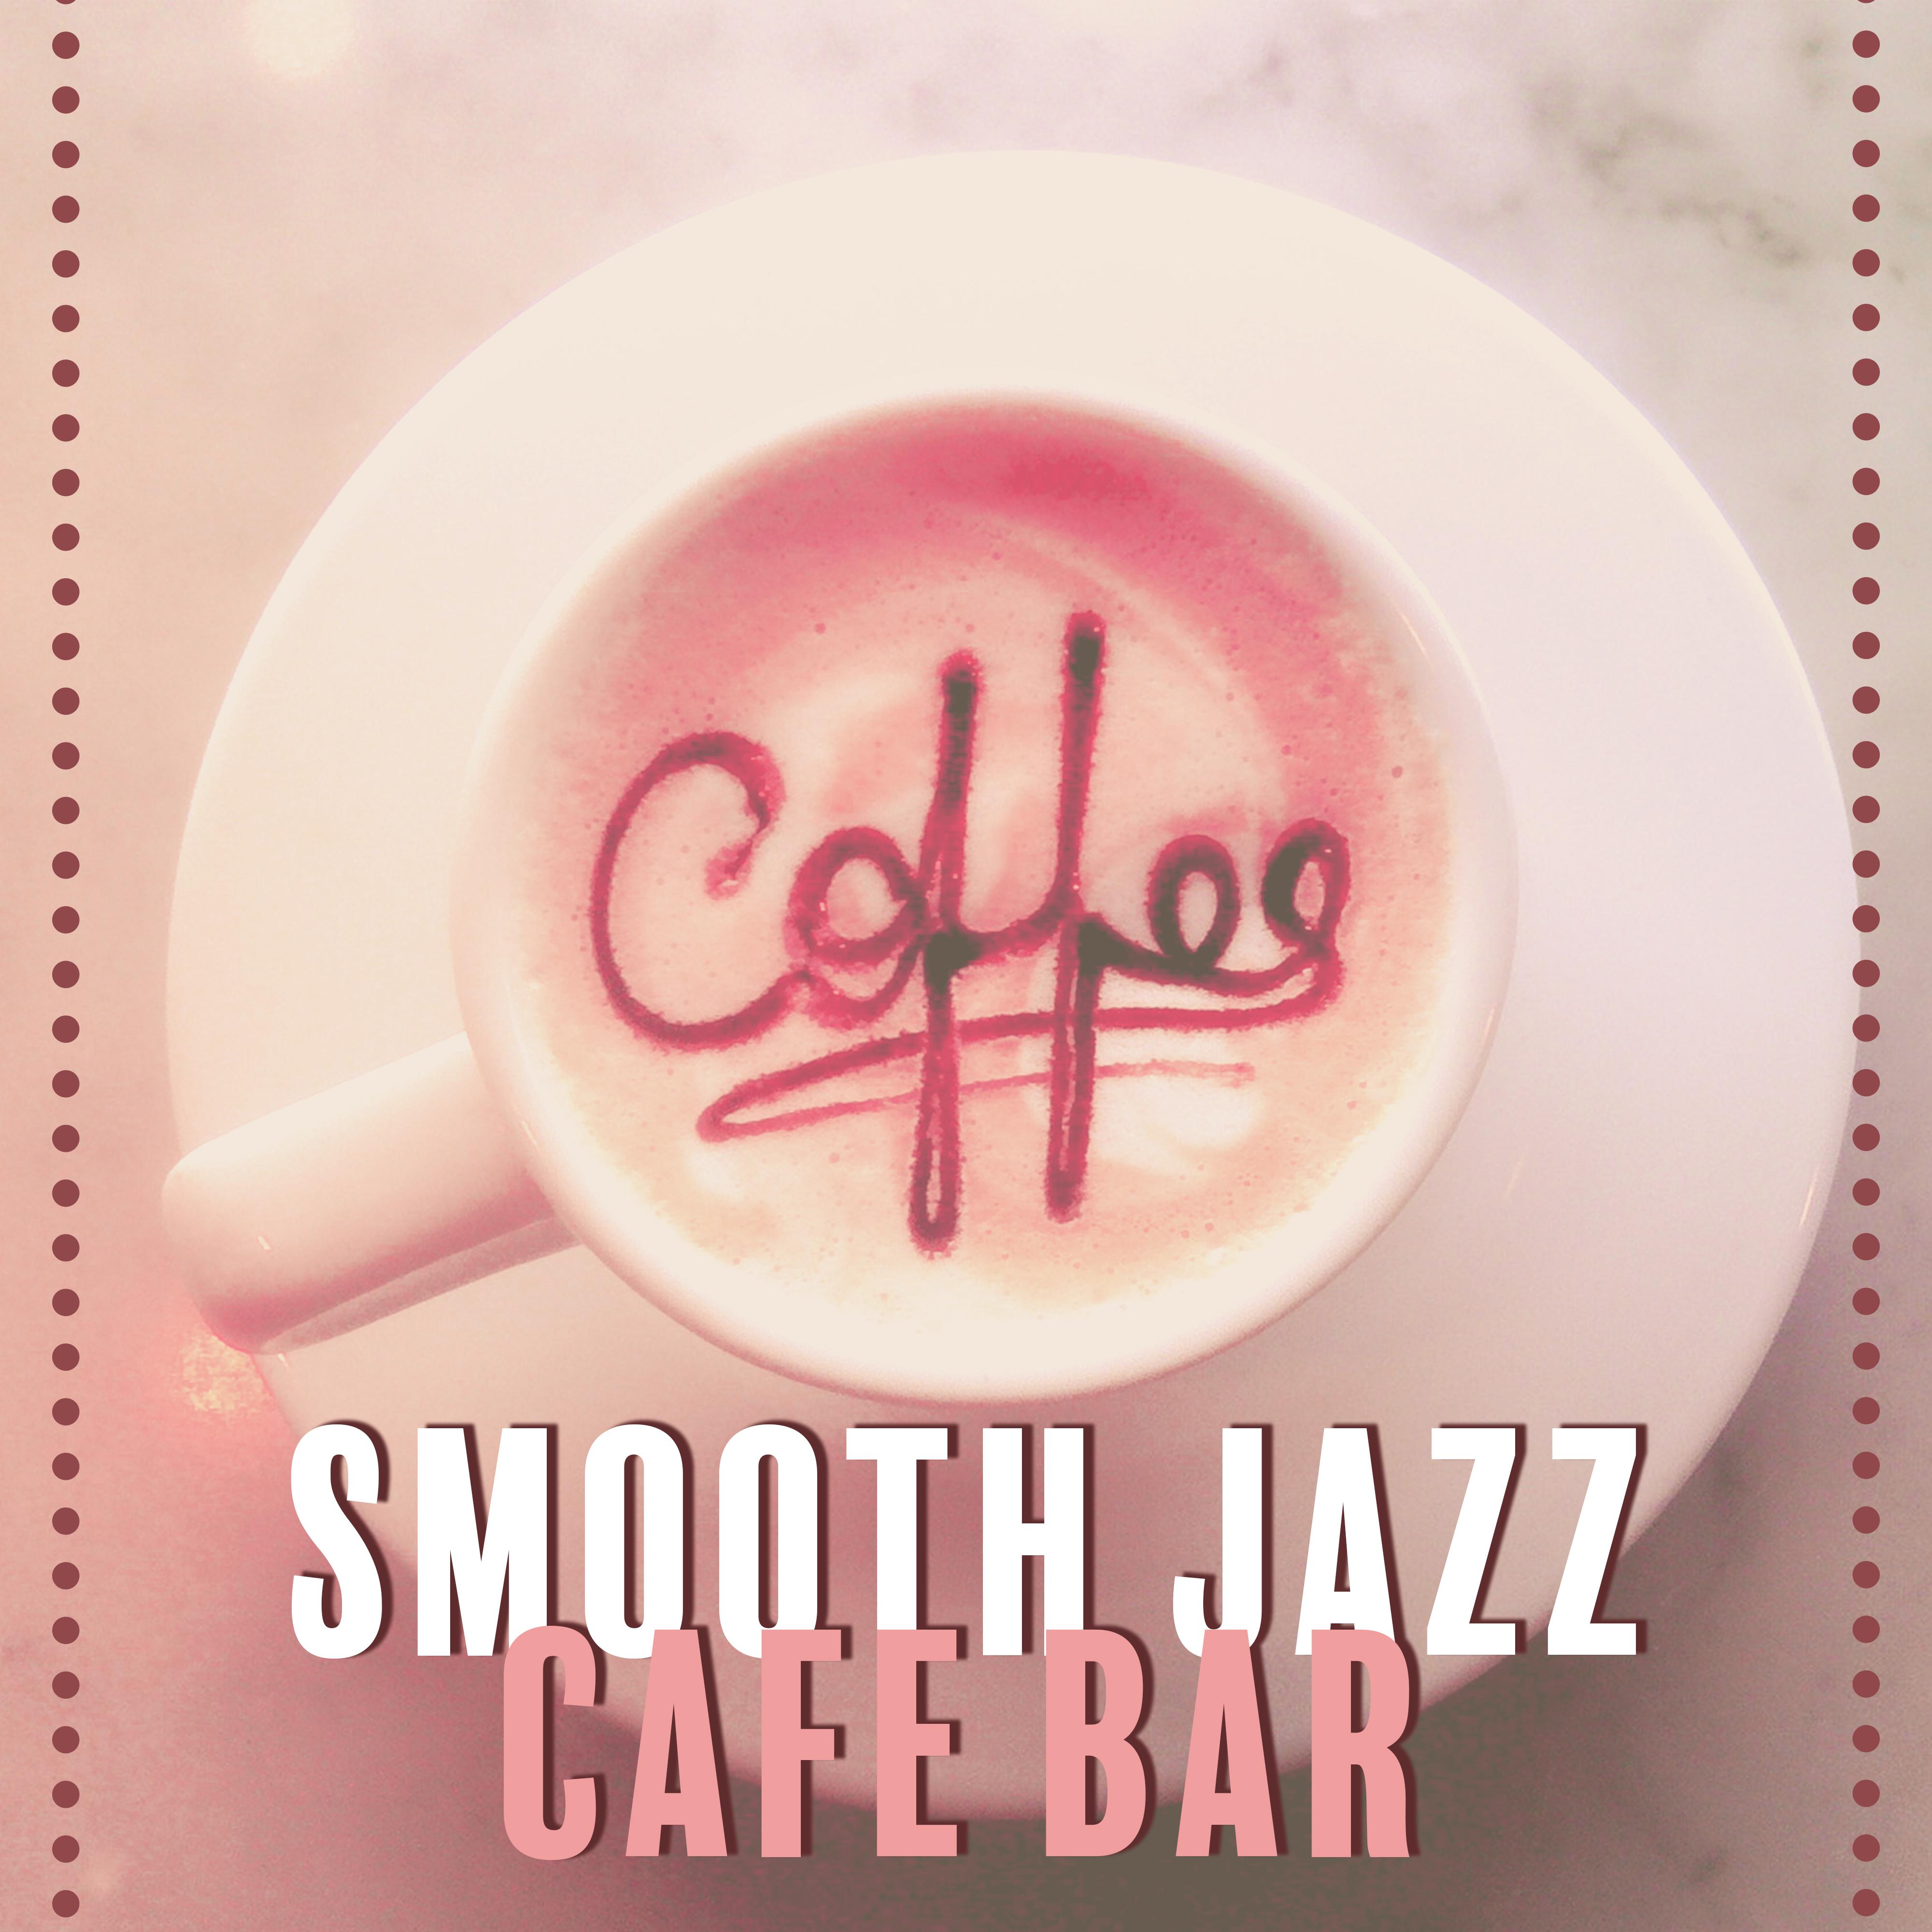 Smooth Jazz Cafe Bar  Mellow Jazz Instrumental, Music for Cafe  Restaurant, Relaxed Jazz